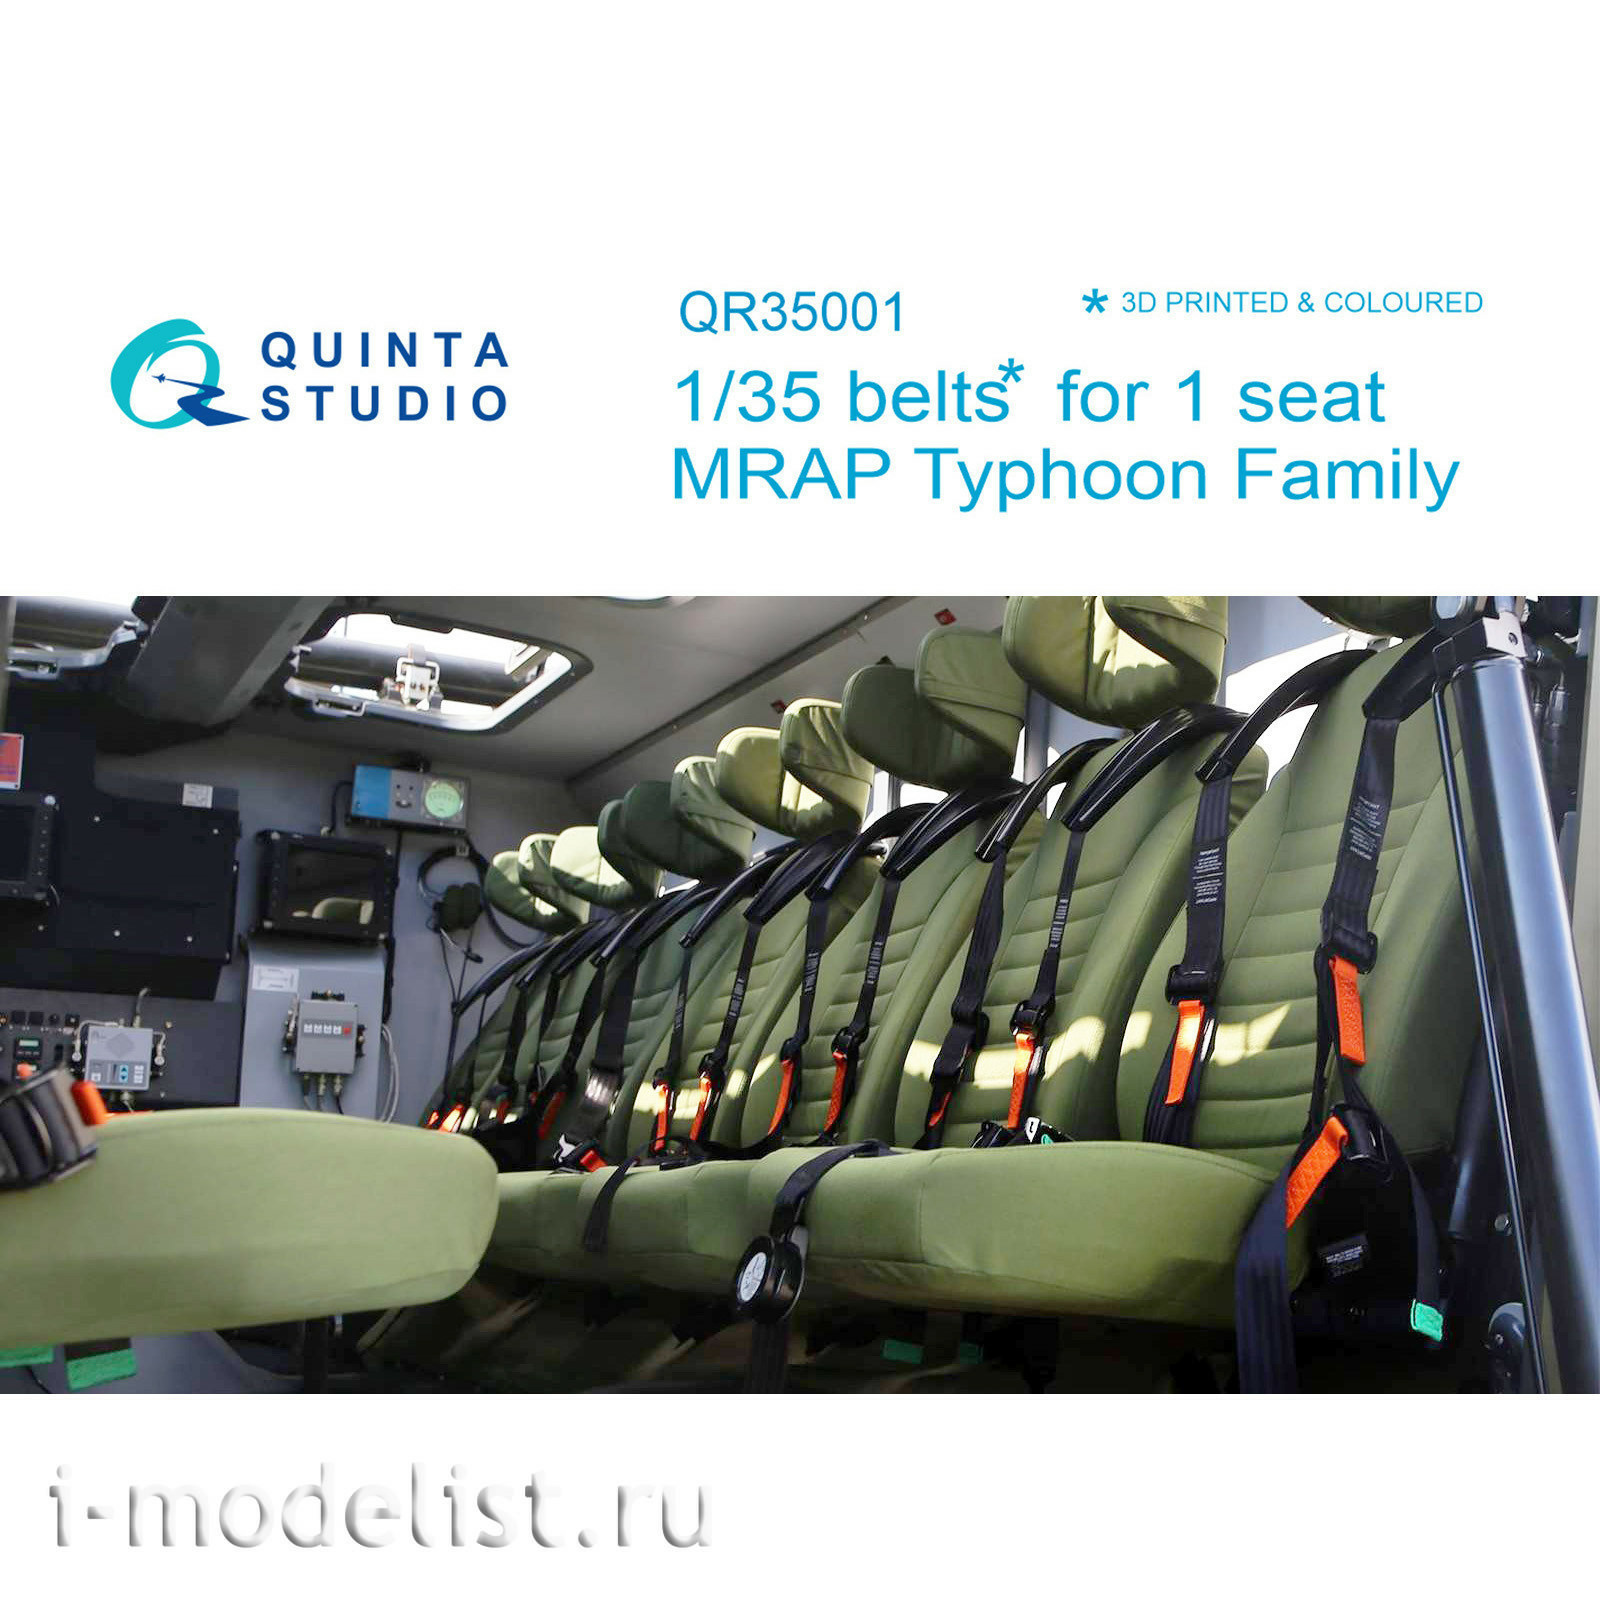 QR35001 Quinta Studio 1/35 Single Seat Belt Kit for Typhoon family of armored vehicles (For all models)